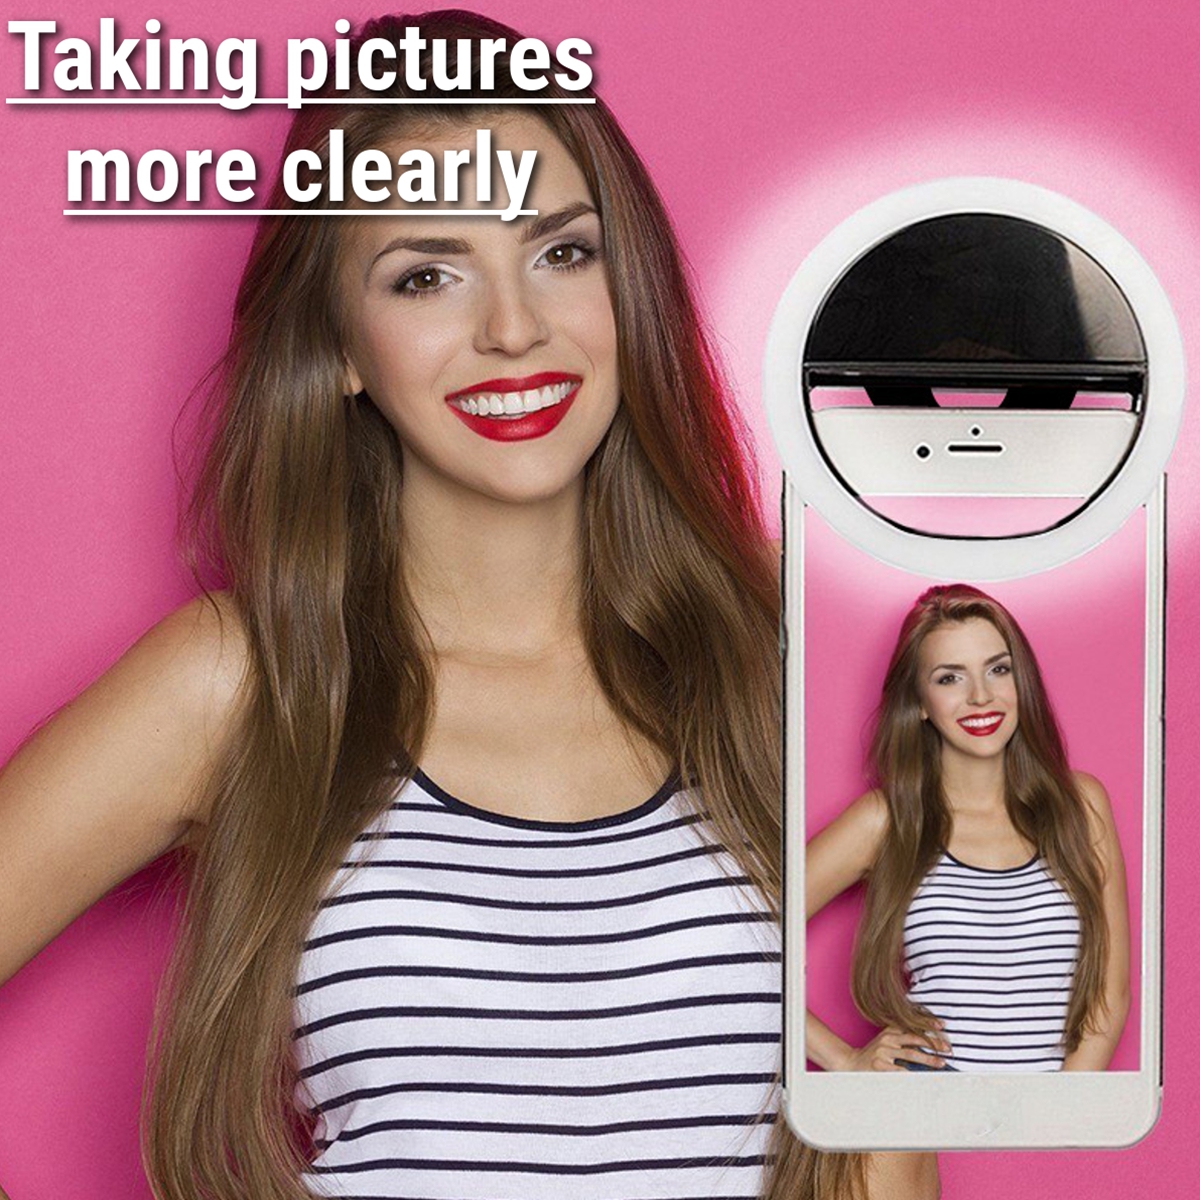 Bakeey Selfie 36 LEDS Fill Lamp Ring Light Universal Clip 3 levels Brightness For Cell Phone